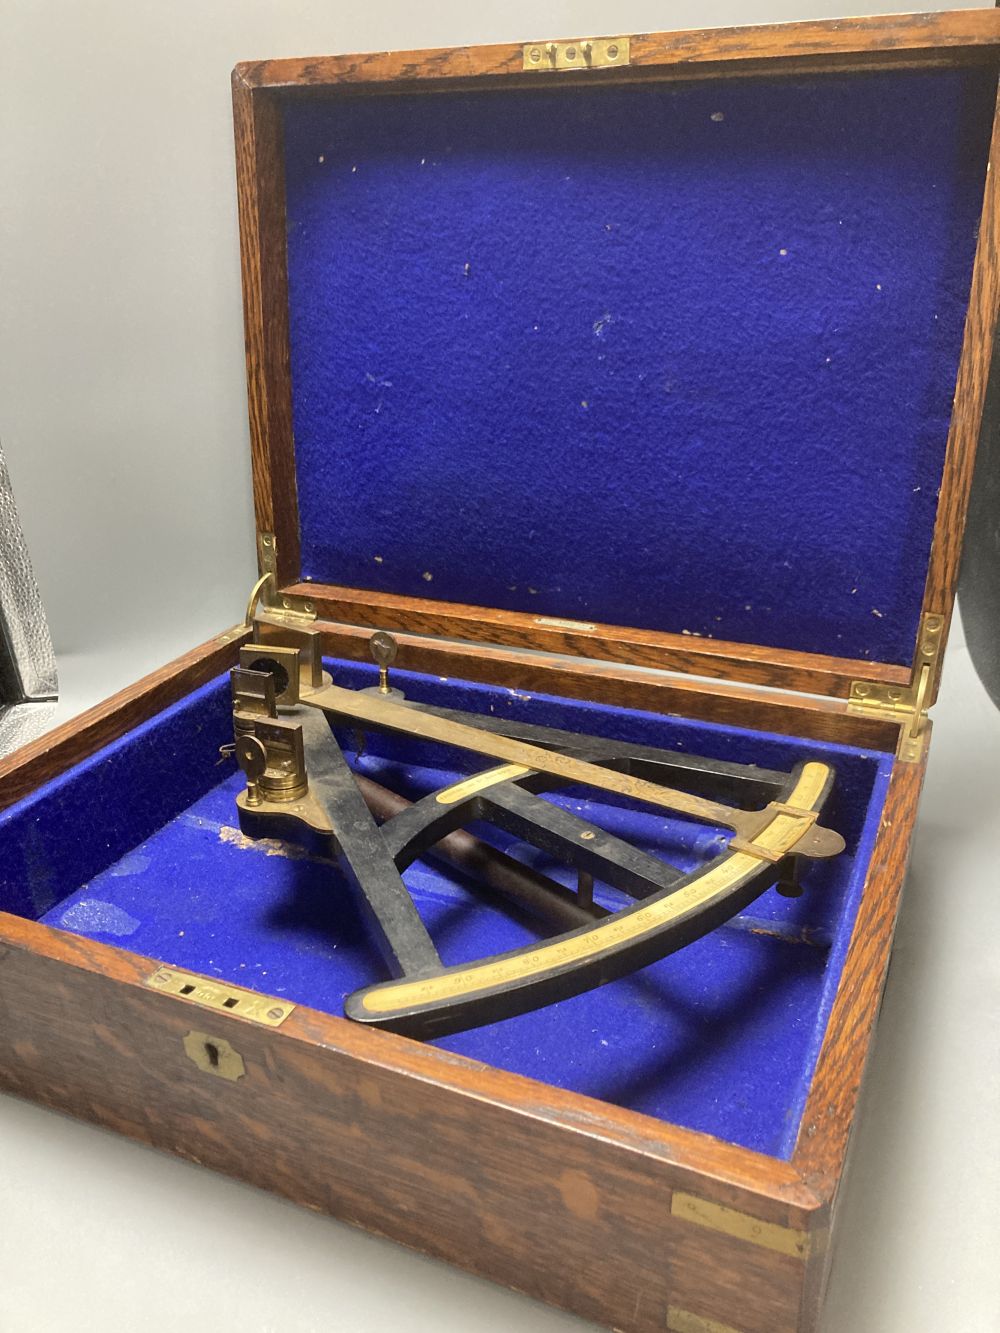 A large 19th century ebony and brass octant, scale 0-95 degrees, by Spencer & Co London, ivory scale, associated box